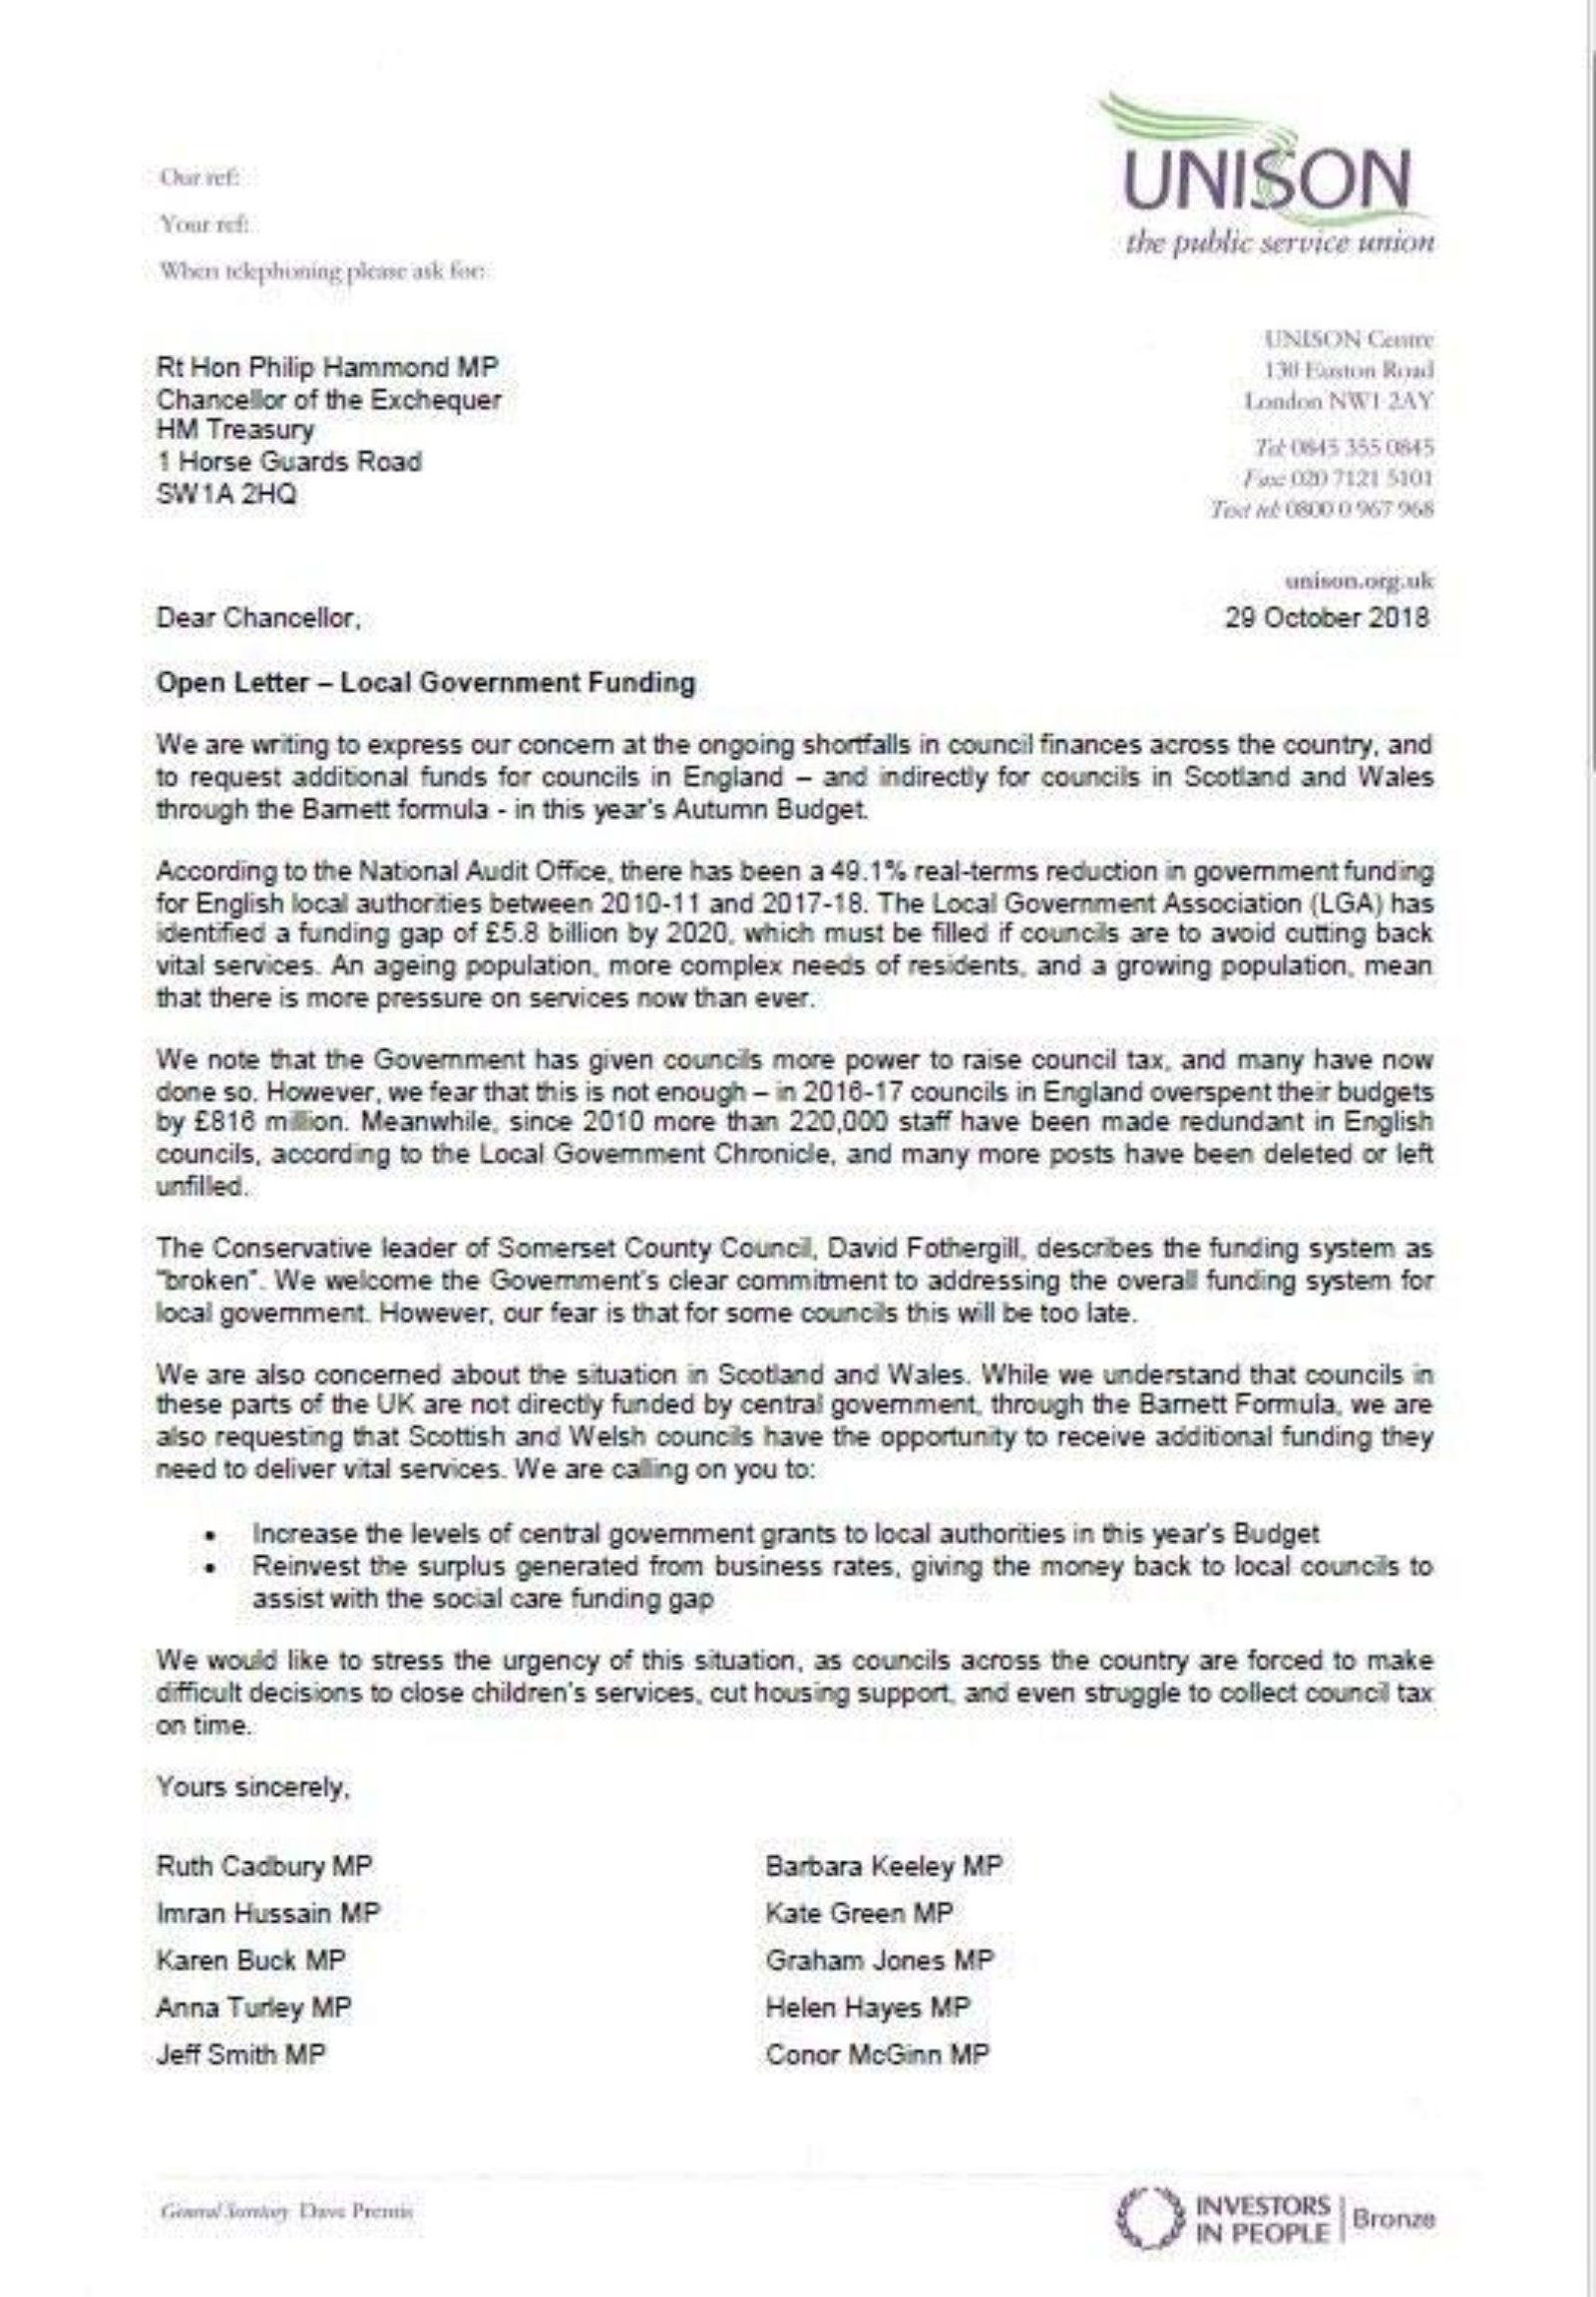 A open letter signed by Gareth Snell and numerous other MP